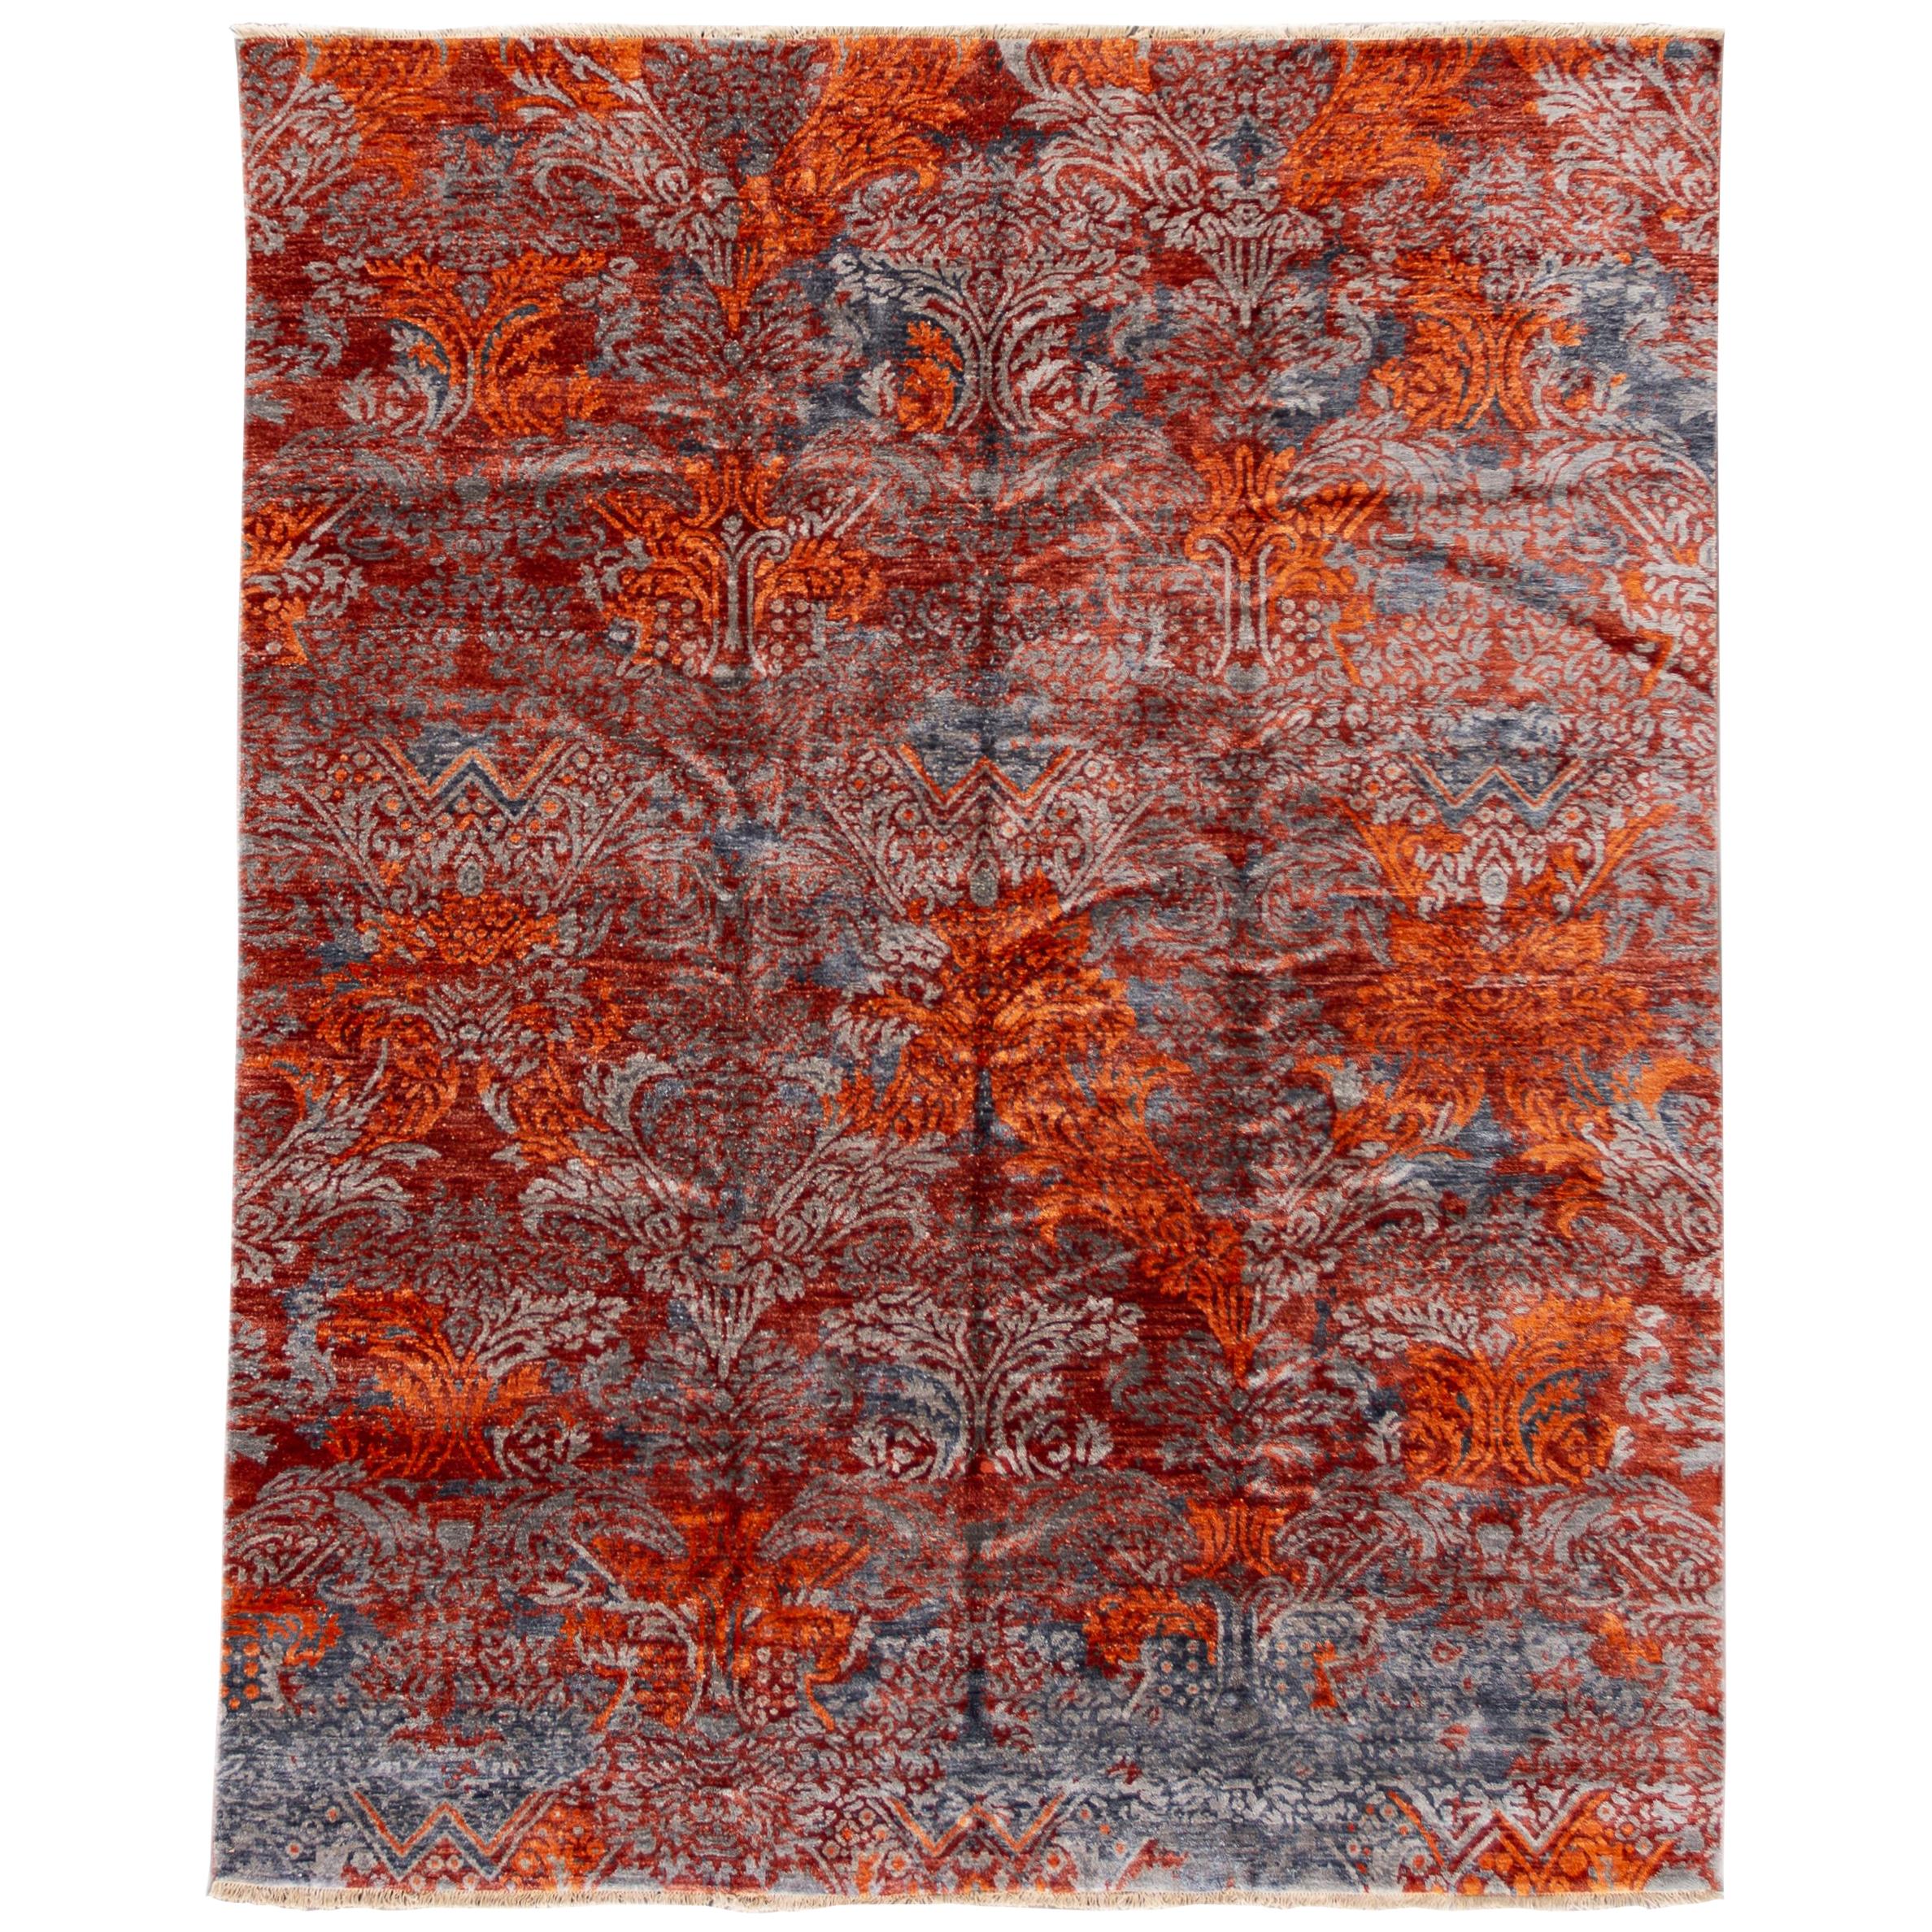 Contemporary Indian Wool & Silk Rug With Allover Rusted Design